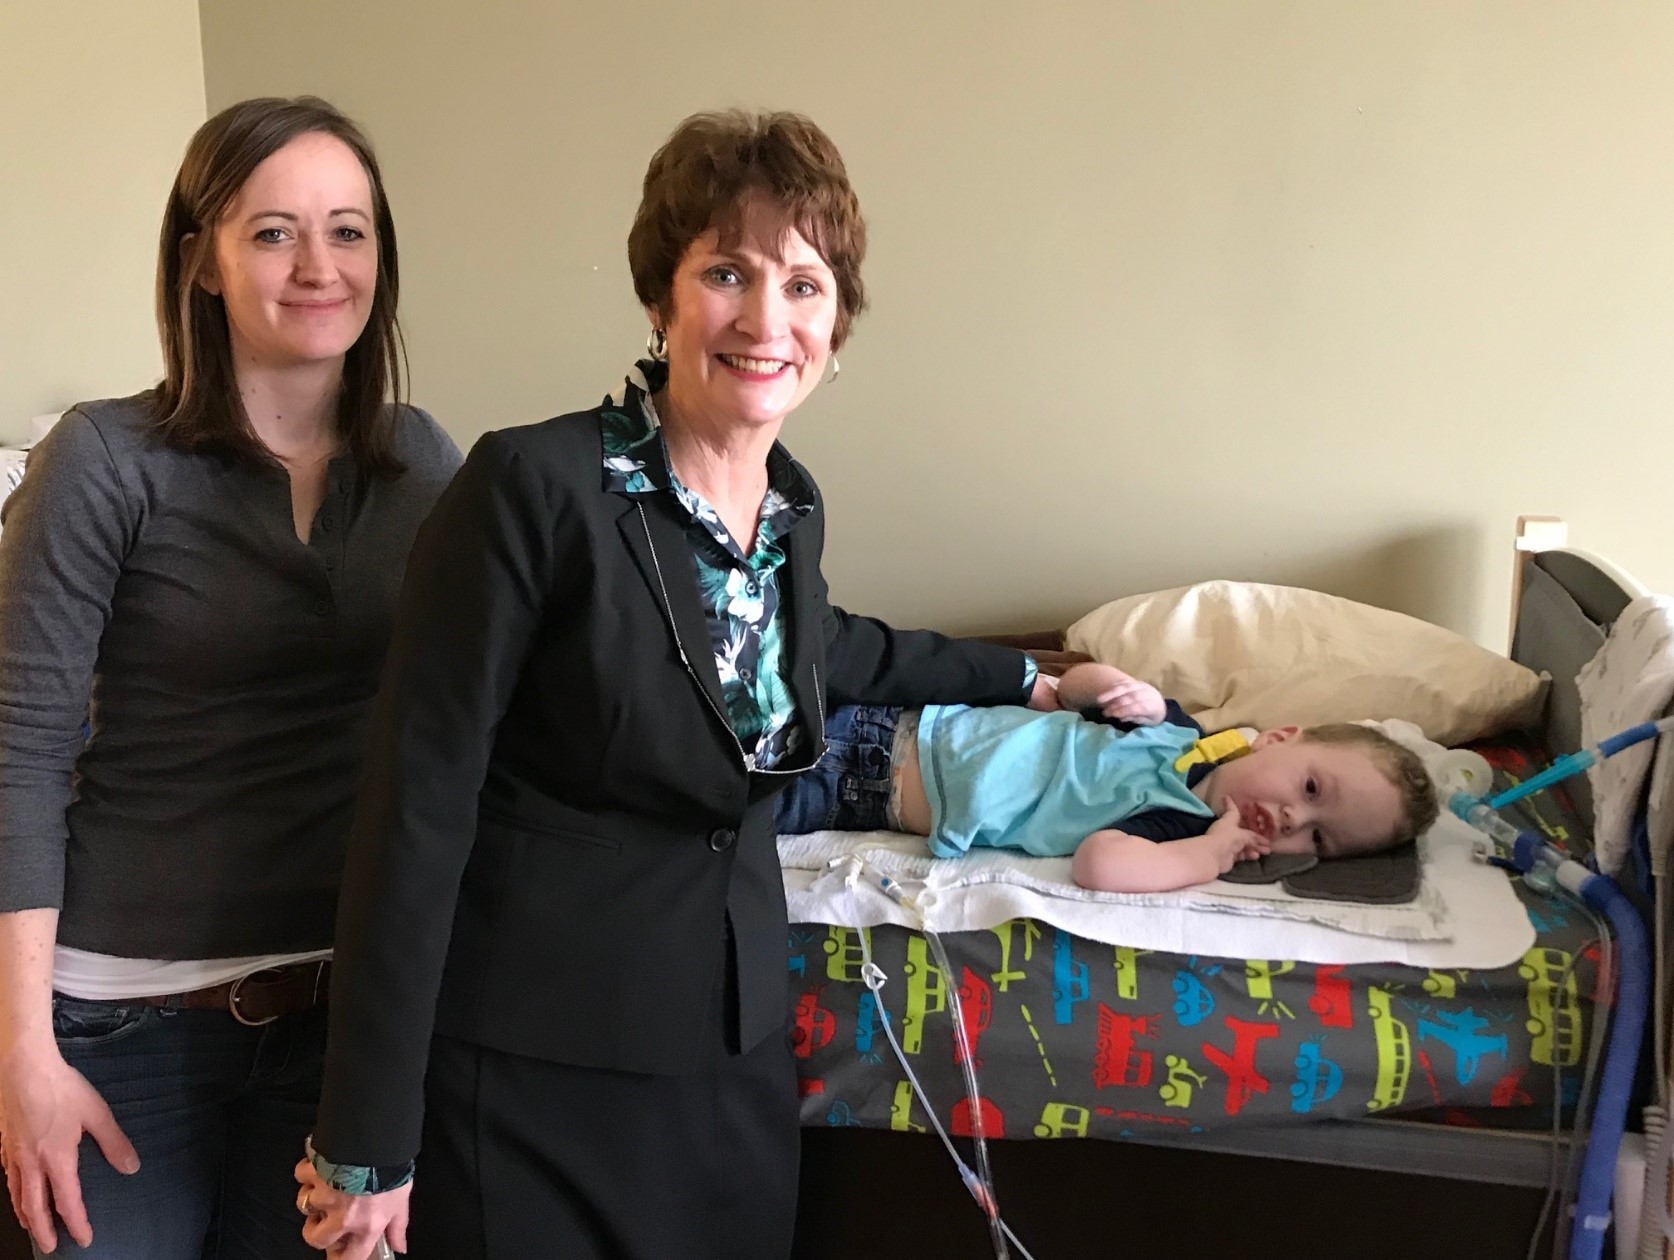 Rep. Quinn visited our home to hear Gideon's story and learn more about what home care means to our family.